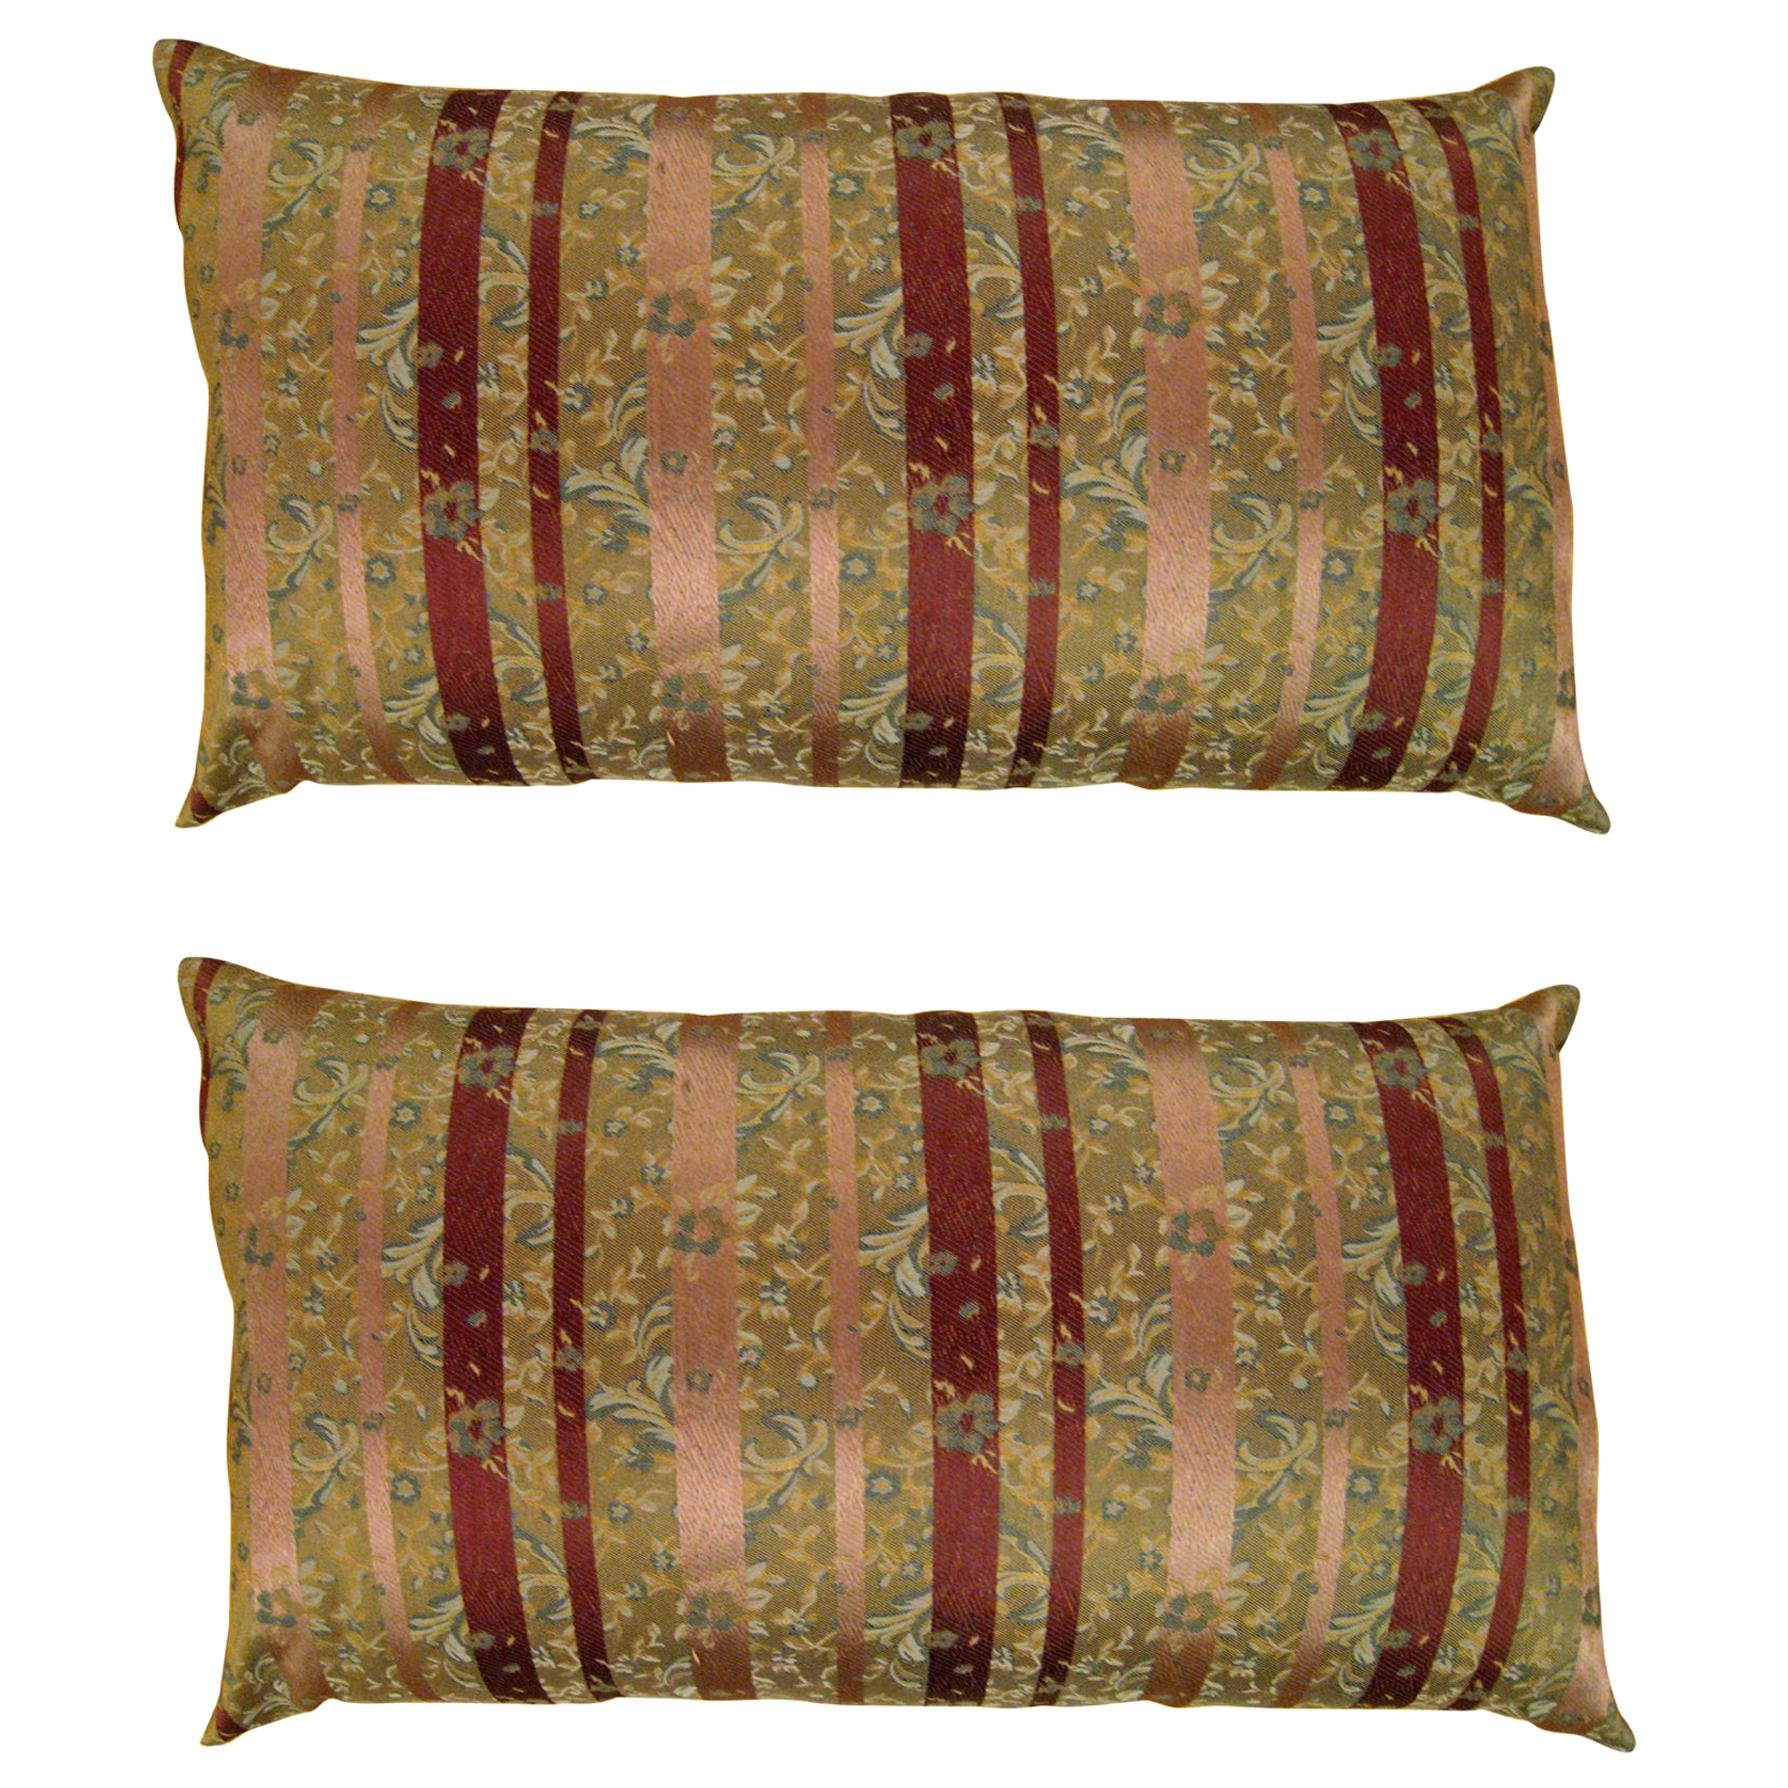 Pair of Large Decorative Satin Pillows w/ Vintage Striped Brocade on Both Sides For Sale